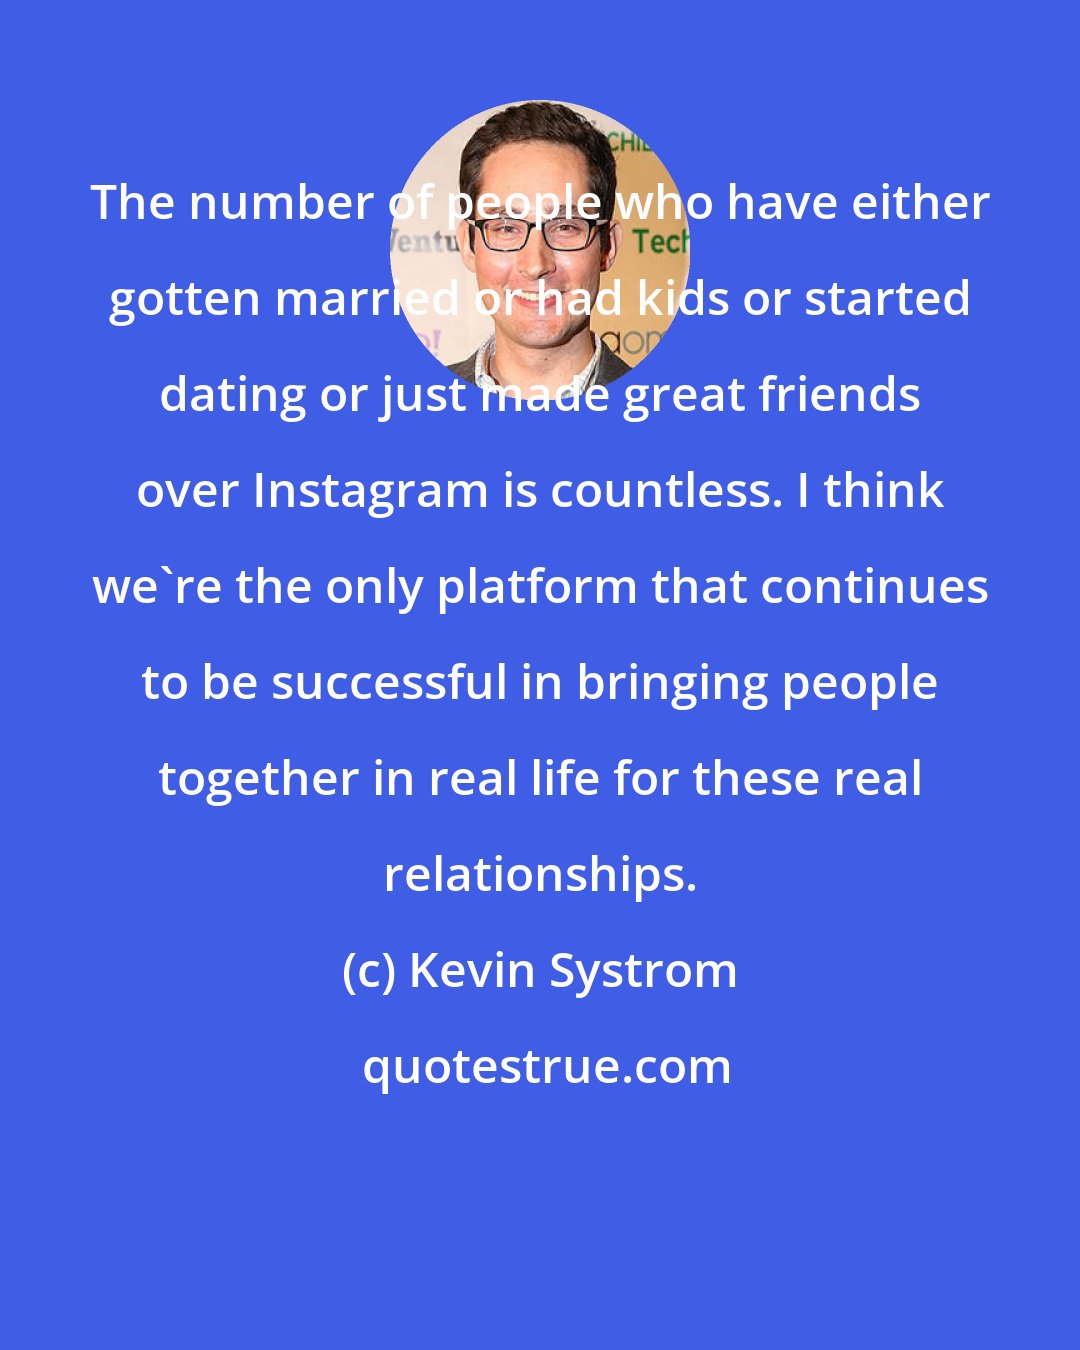 Kevin Systrom: The number of people who have either gotten married or had kids or started dating or just made great friends over Instagram is countless. I think we're the only platform that continues to be successful in bringing people together in real life for these real relationships.